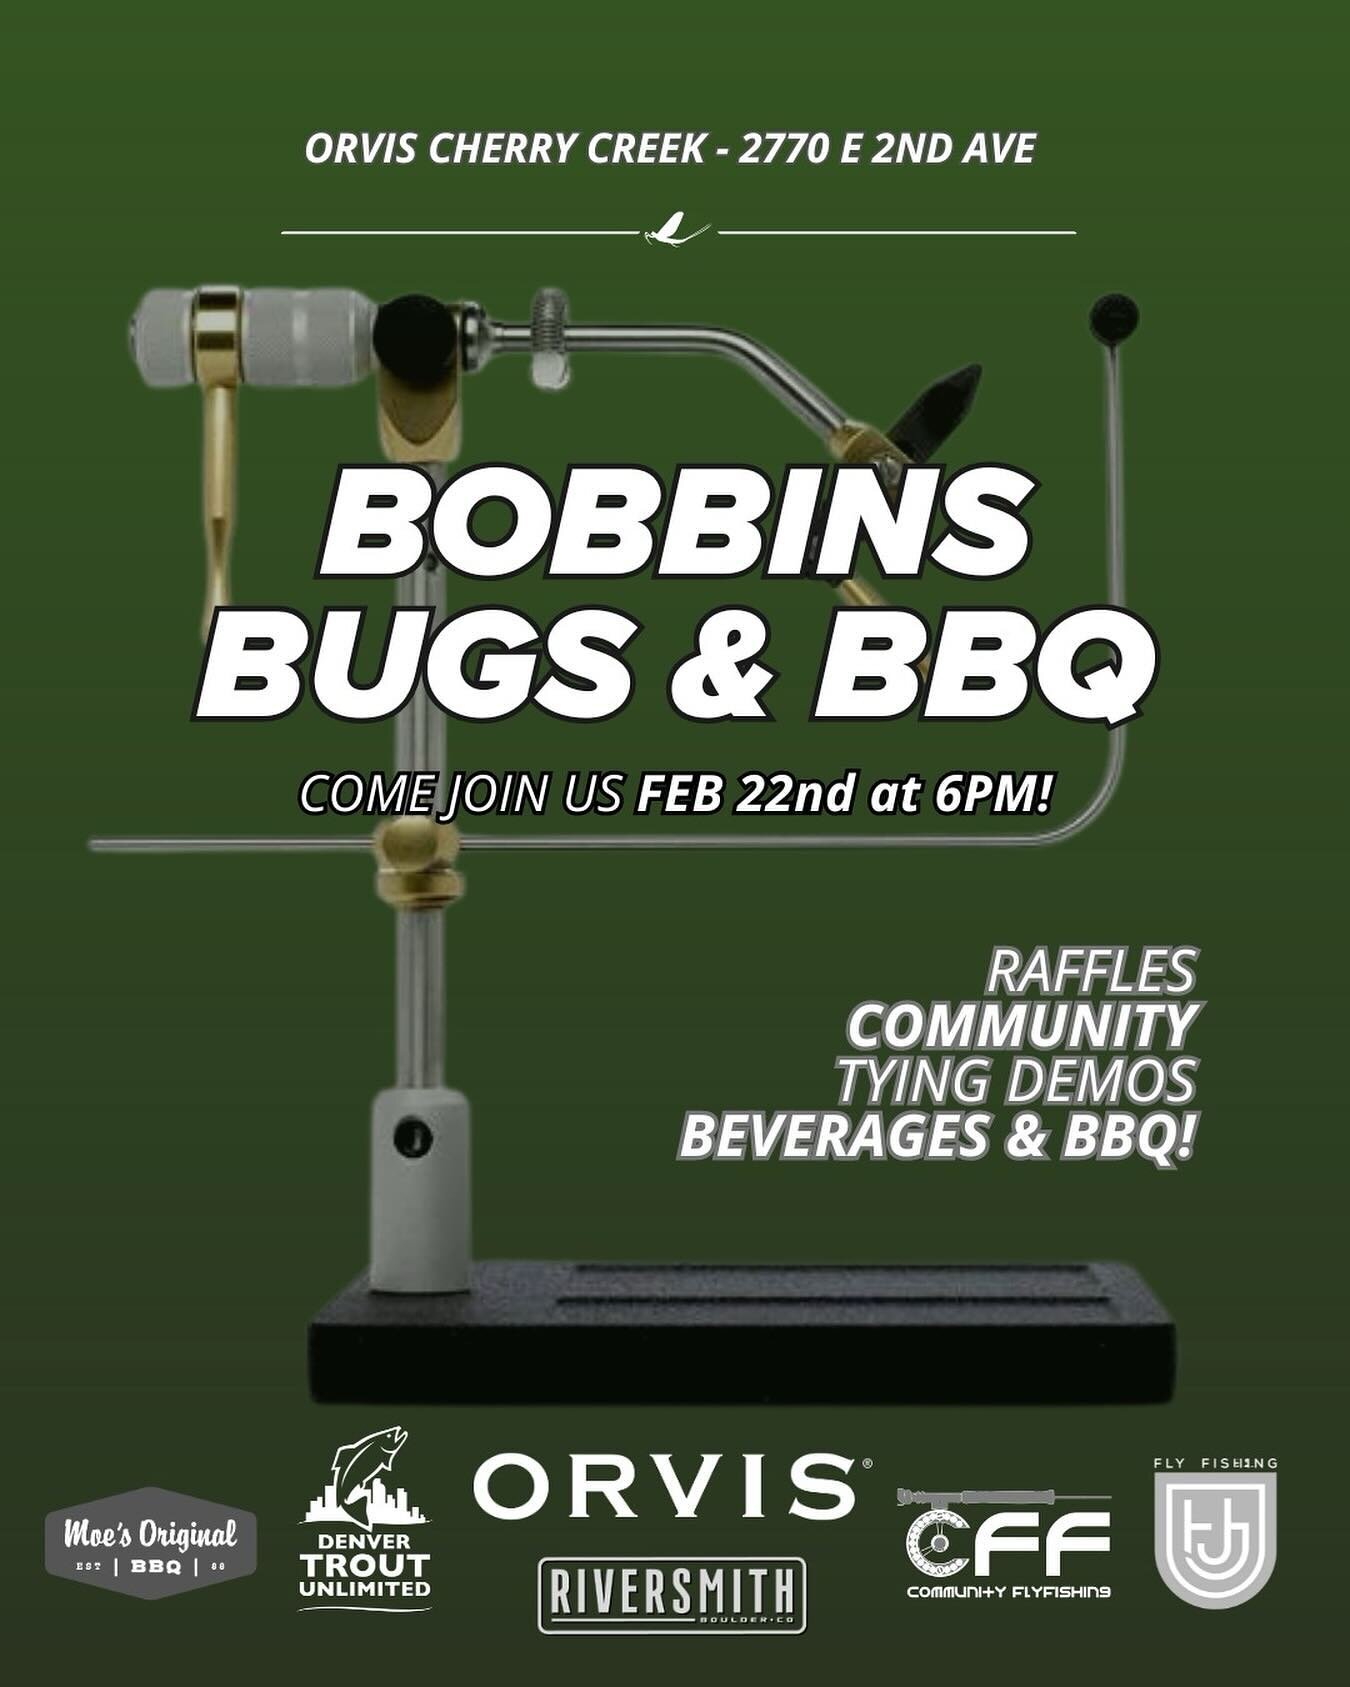 Join @orvischerrycreek, @denvertroutunlimited, and @communityflyfishing for a fly-tying night at the Orvis Cherry Creek store on February 22nd from 6pm-8pm, We&rsquo;ll be tying up some bugs, enjoying some BBQ, and there will be some fun raffle items